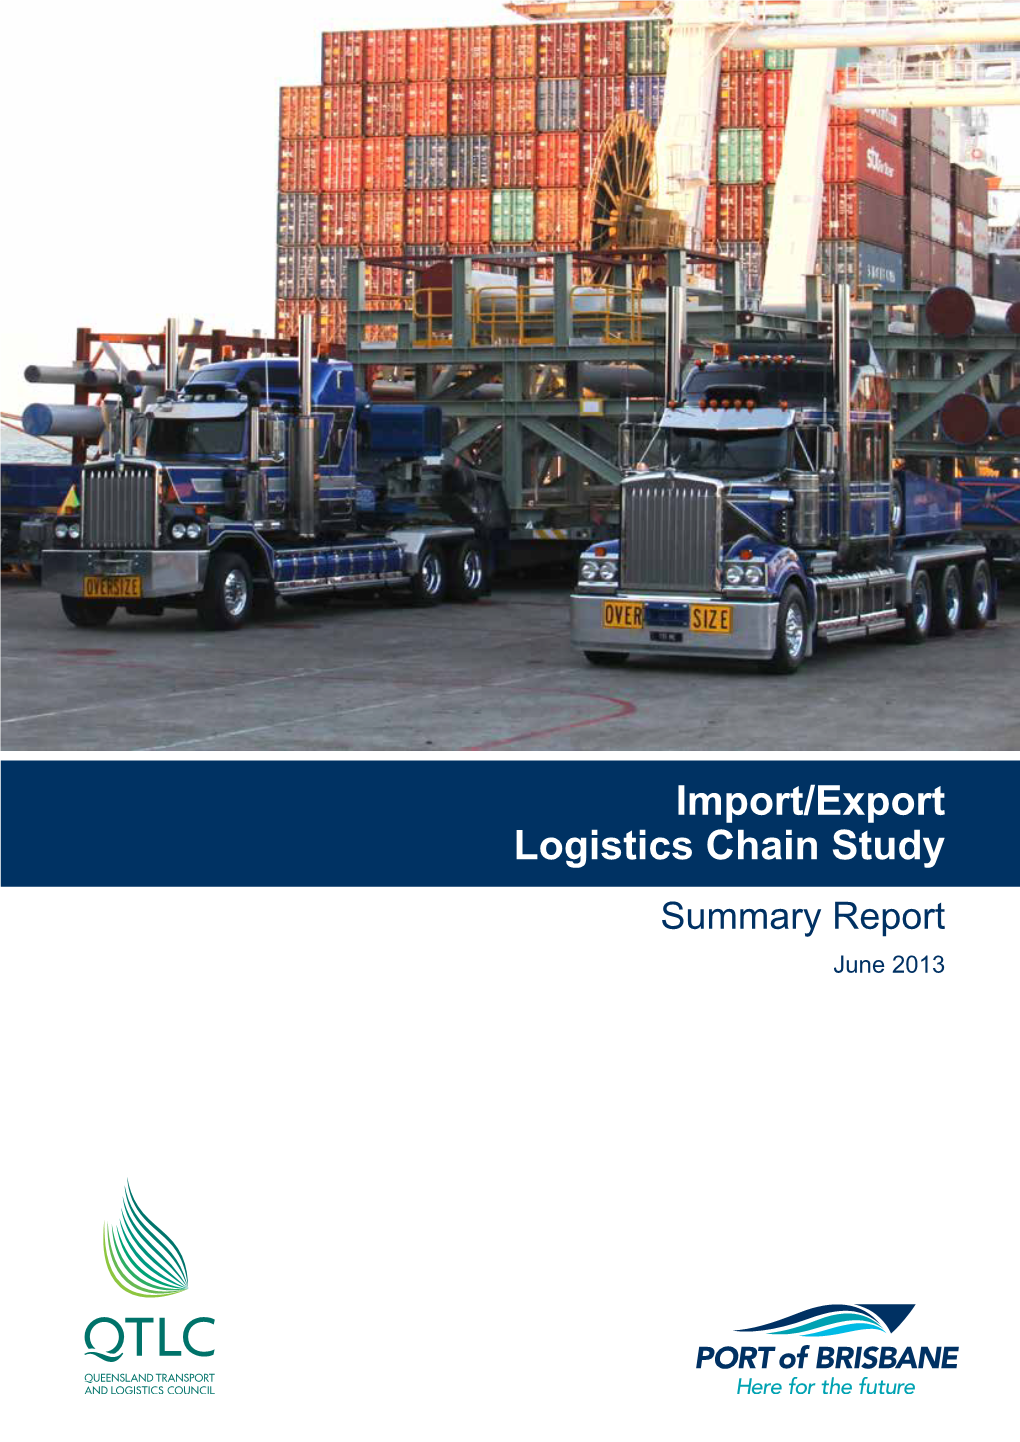 Import/Export Logistics Chain Study Summary Report June 2013 RELIANCE and DISCLAIMER